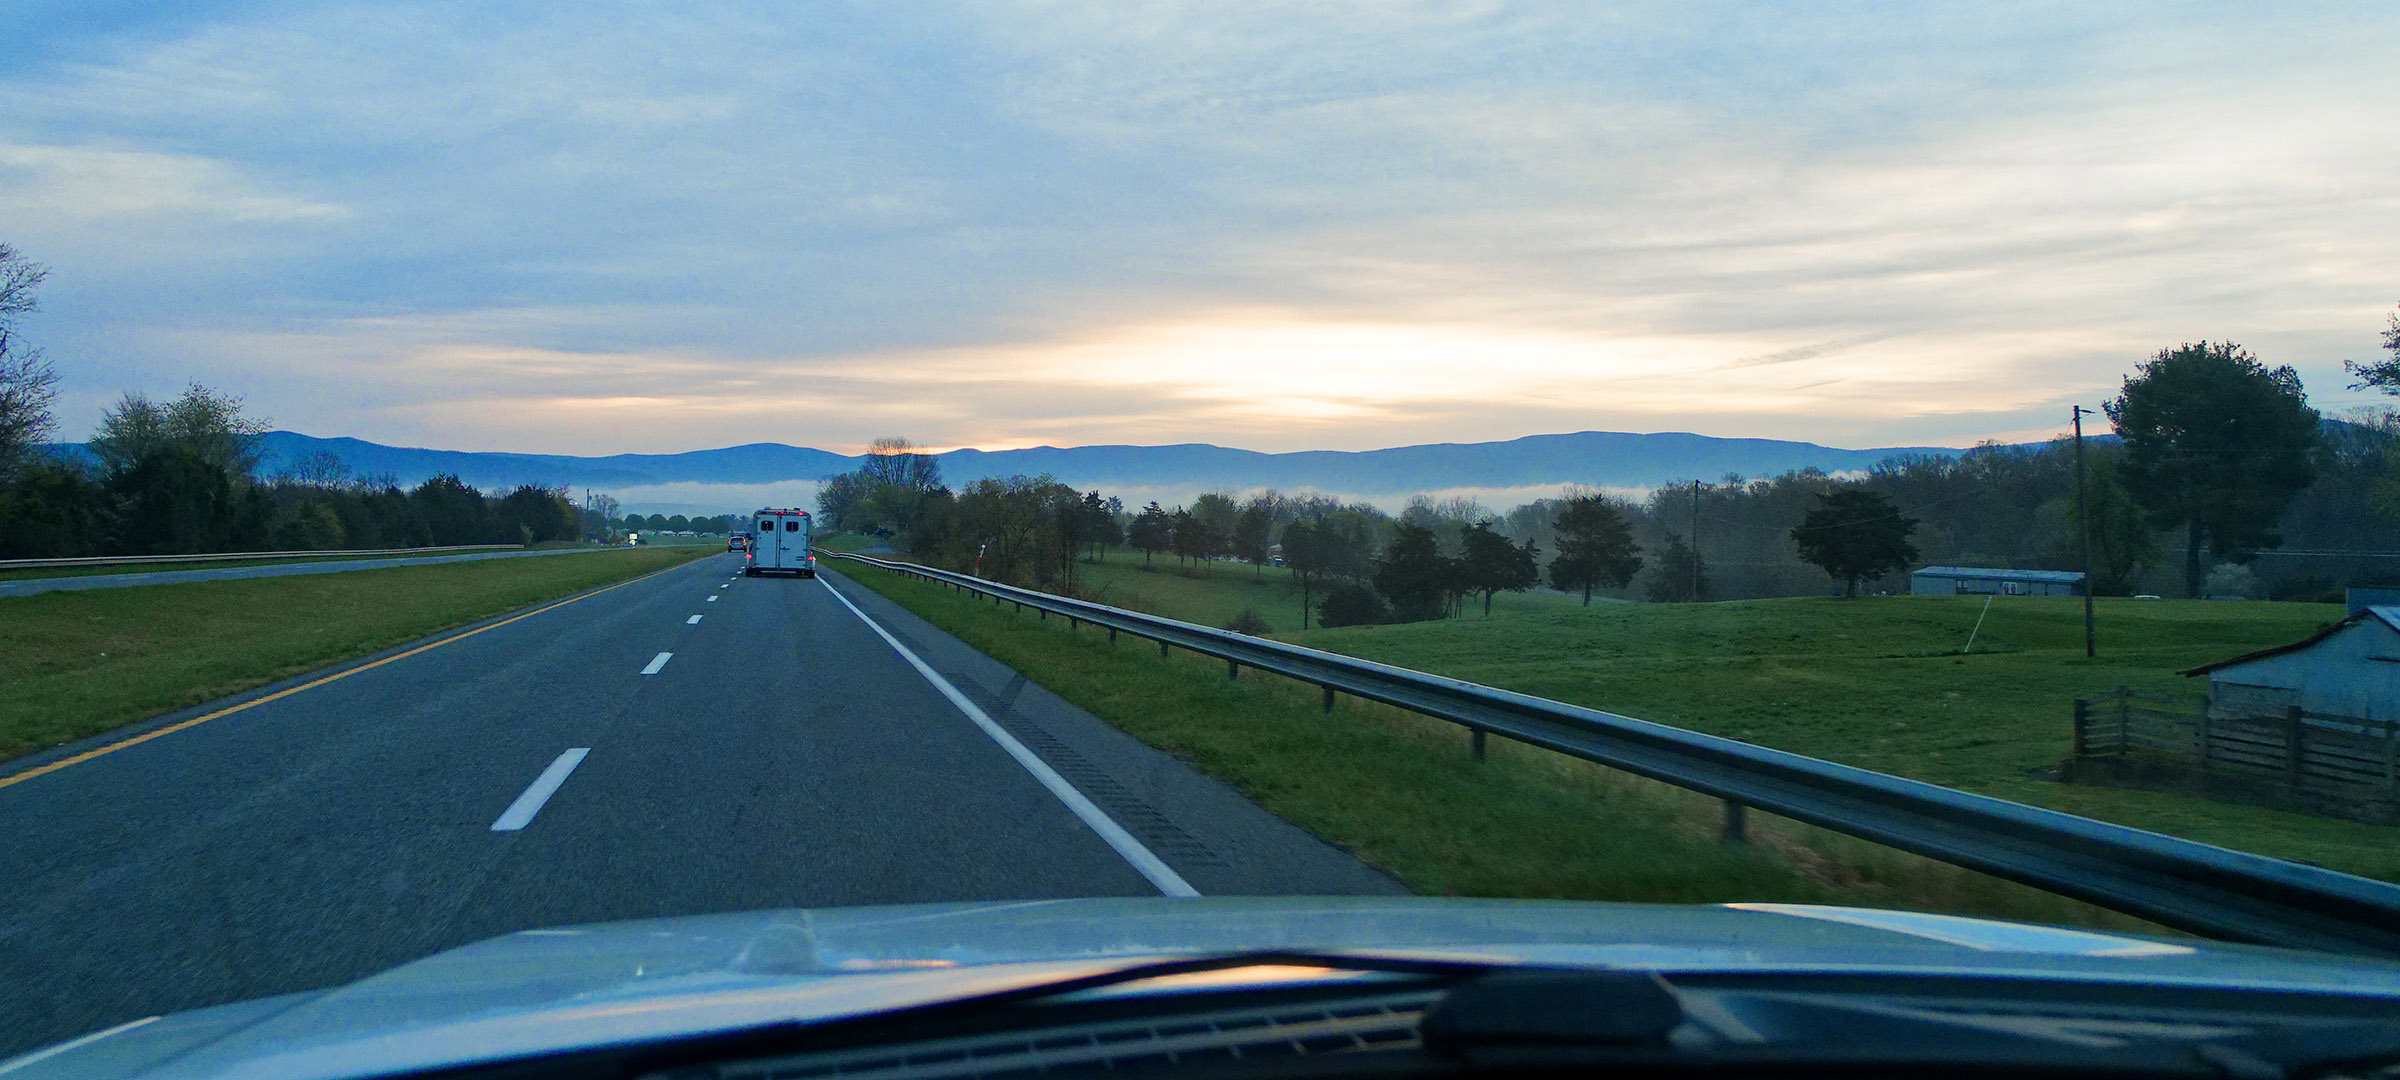 The Blue Ridge Mountains at sunrise as viewed from Highway 33.  Fog is present over the South branch of the Shenandoah River.